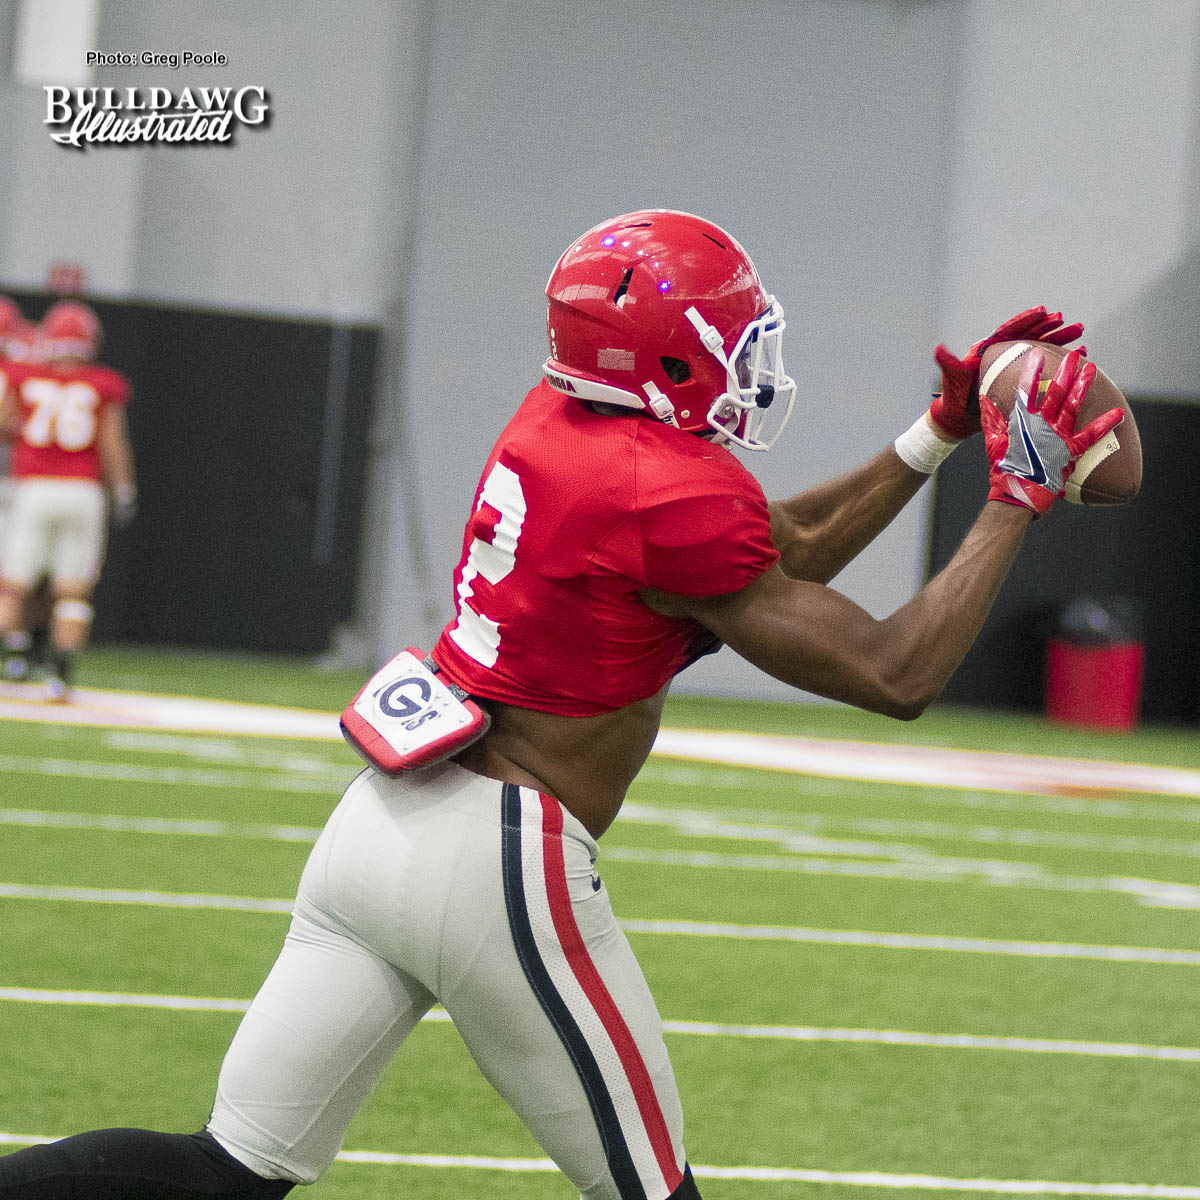 Jayson Stanley (2) - UGA Fall Camp - Practice No. 15 - Wednesday, August 16, 2017